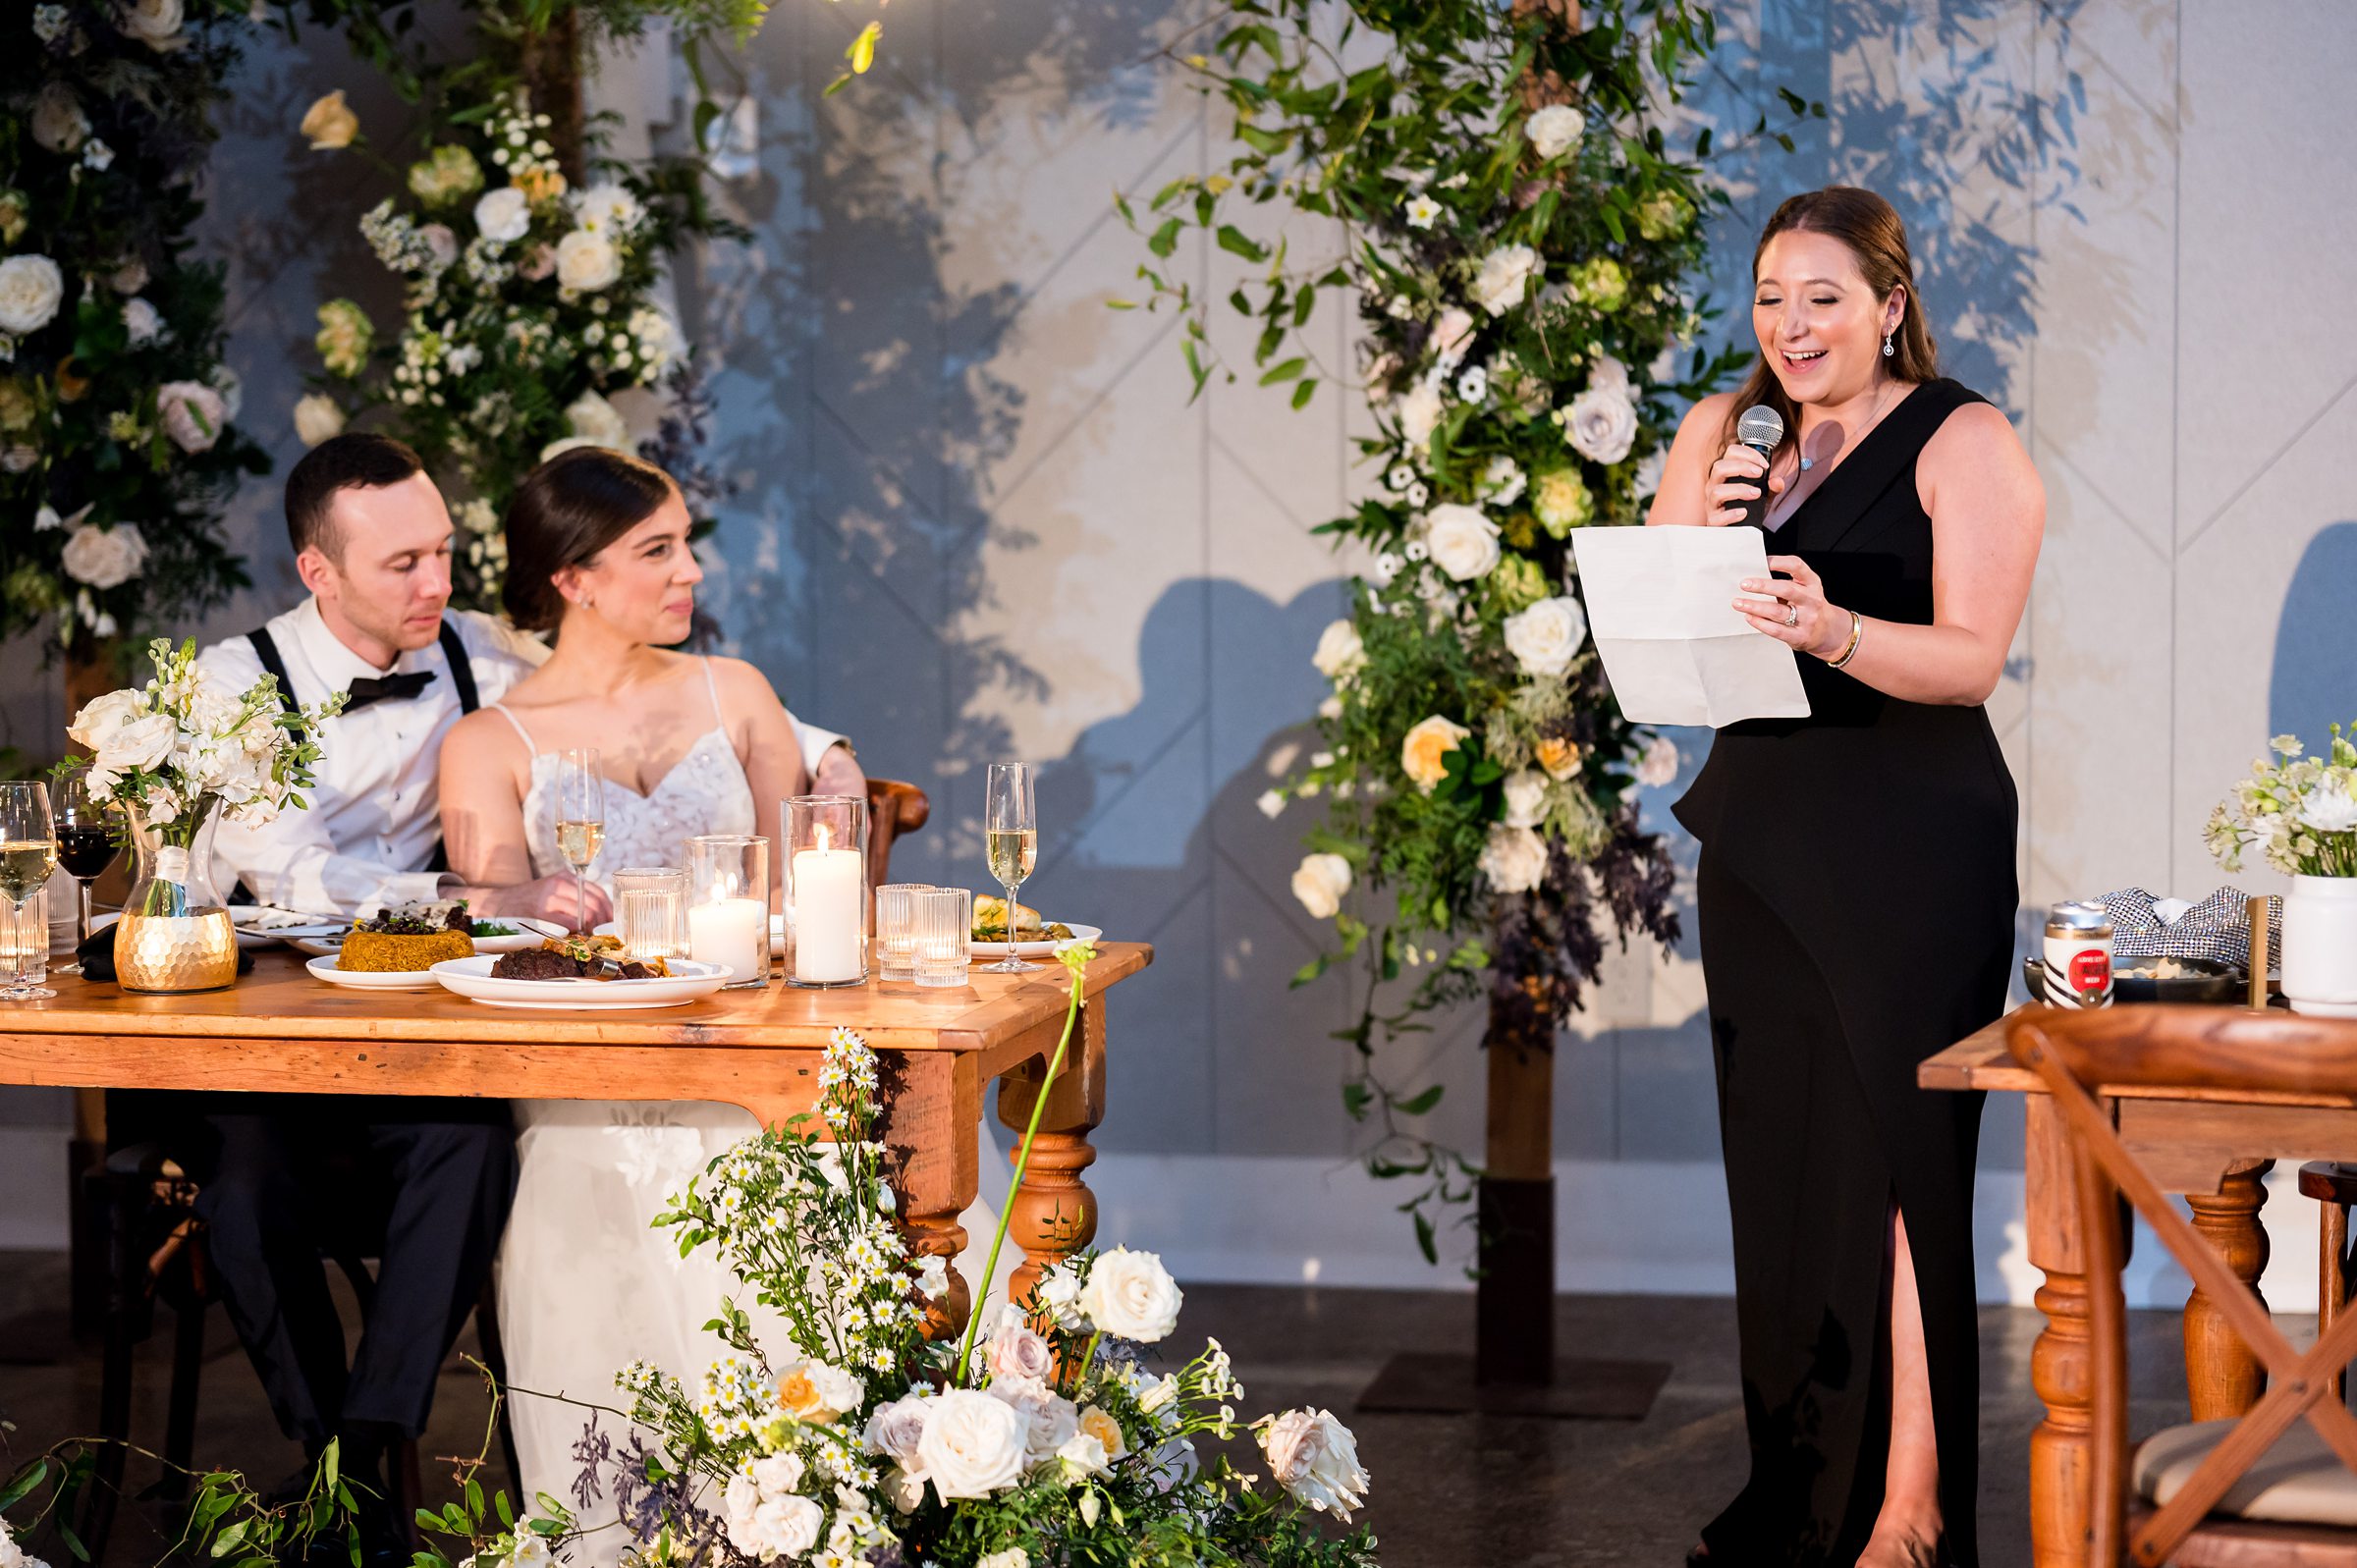 At a Lilah Events wedding, the bride gave a heartwarming speech at the reception.